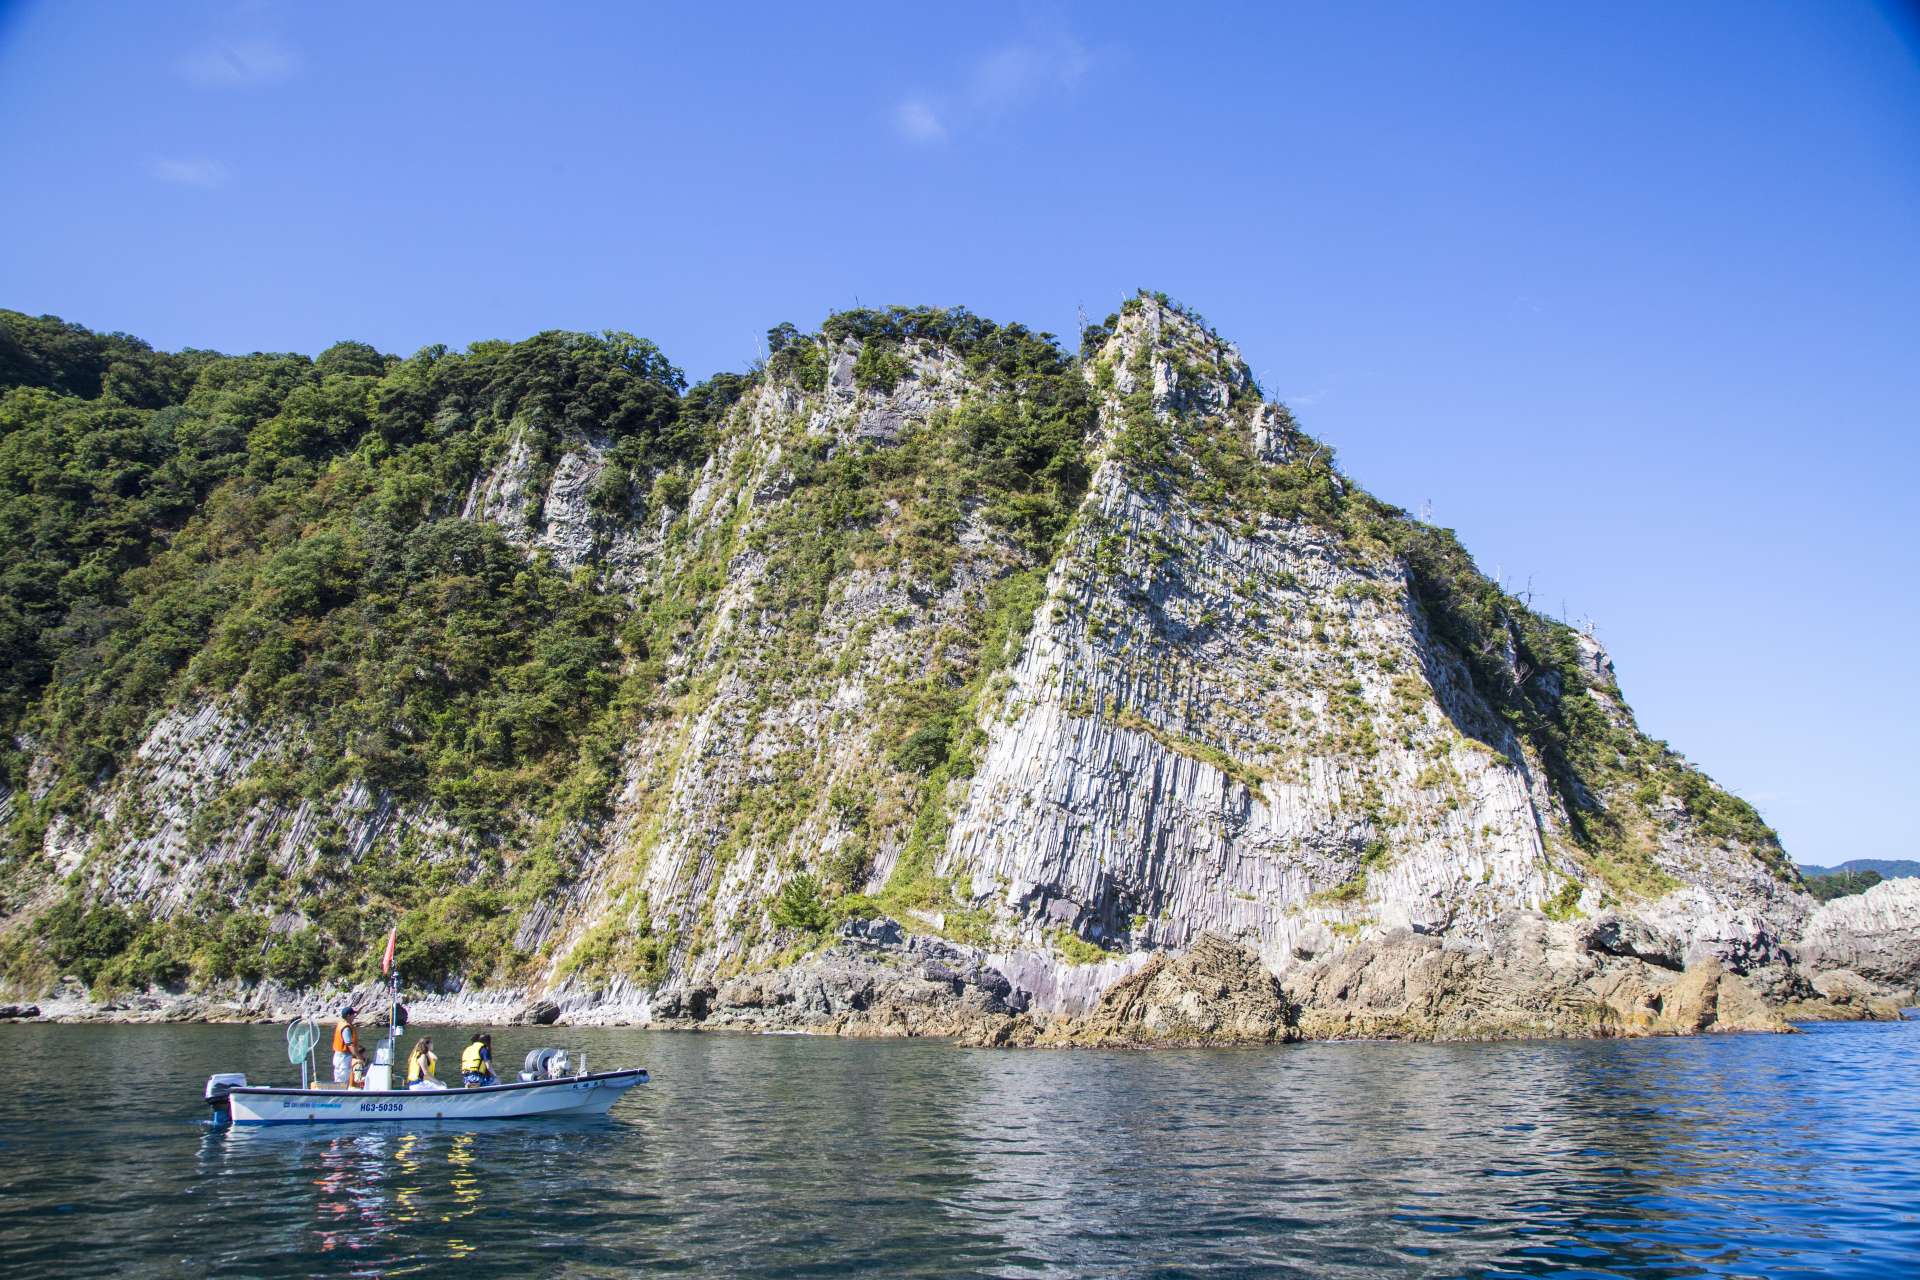 The Marine Geotaxi allows visitors to get up close to Yoroi no Sode, a nationally designated natural monument. 